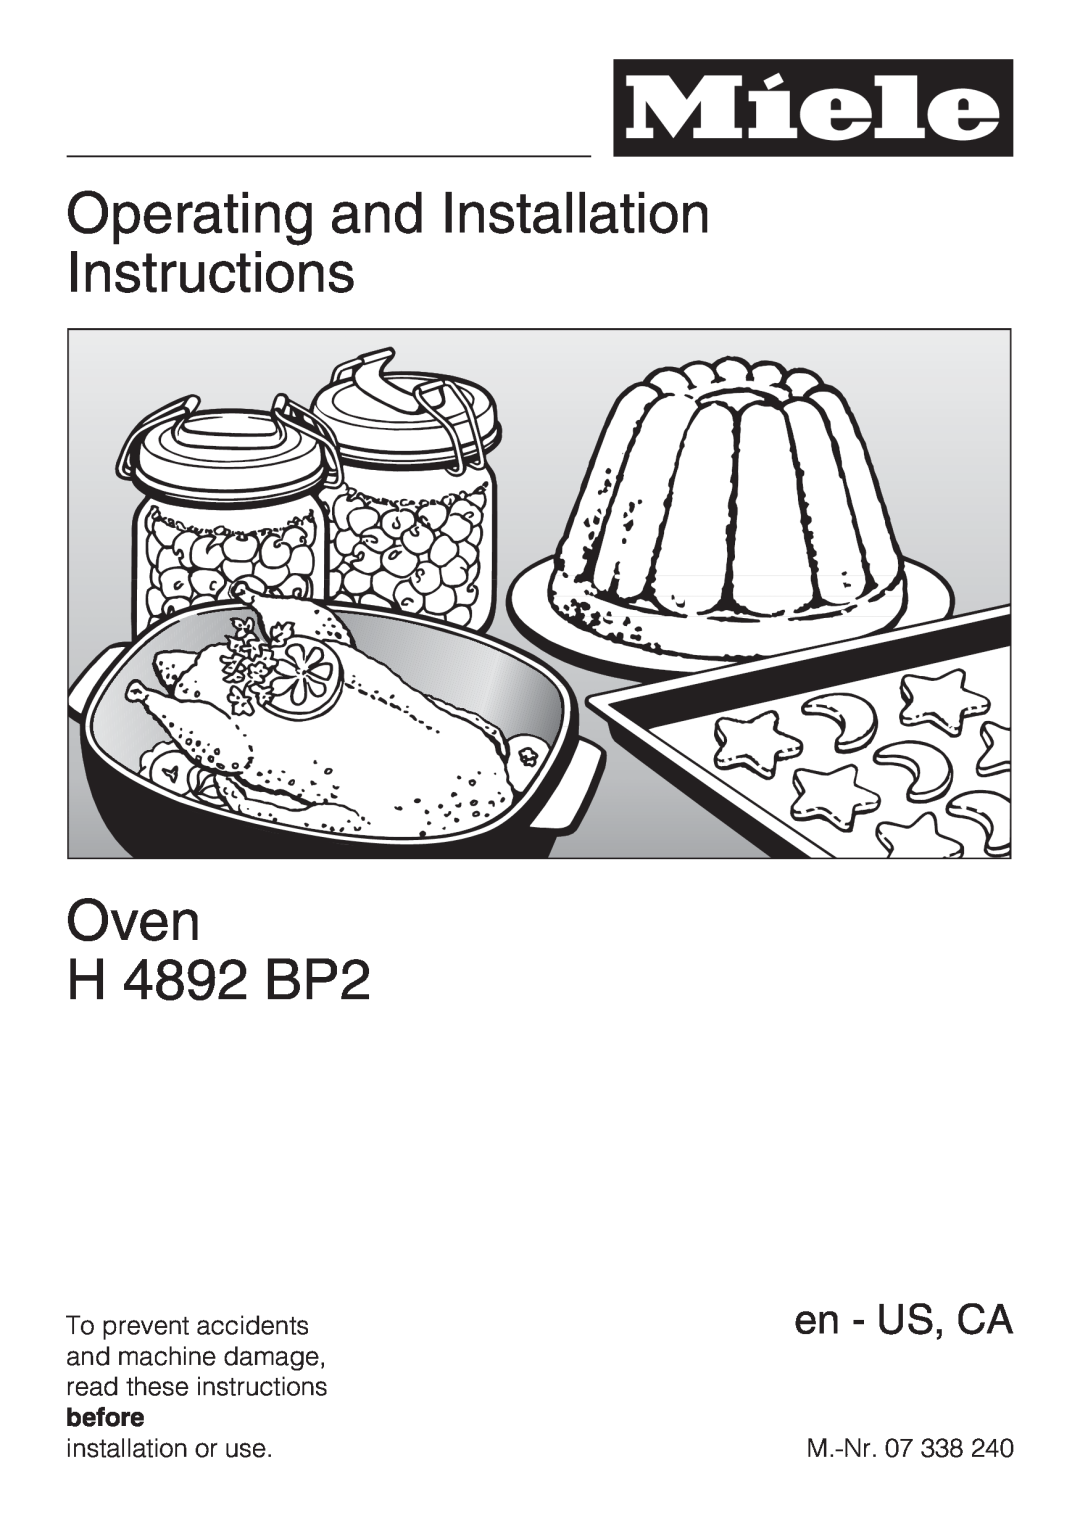 Miele H4892BP2 installation instructions Operating and Installation Instructions, Oven, H 4892 BP2, en - US, CA 